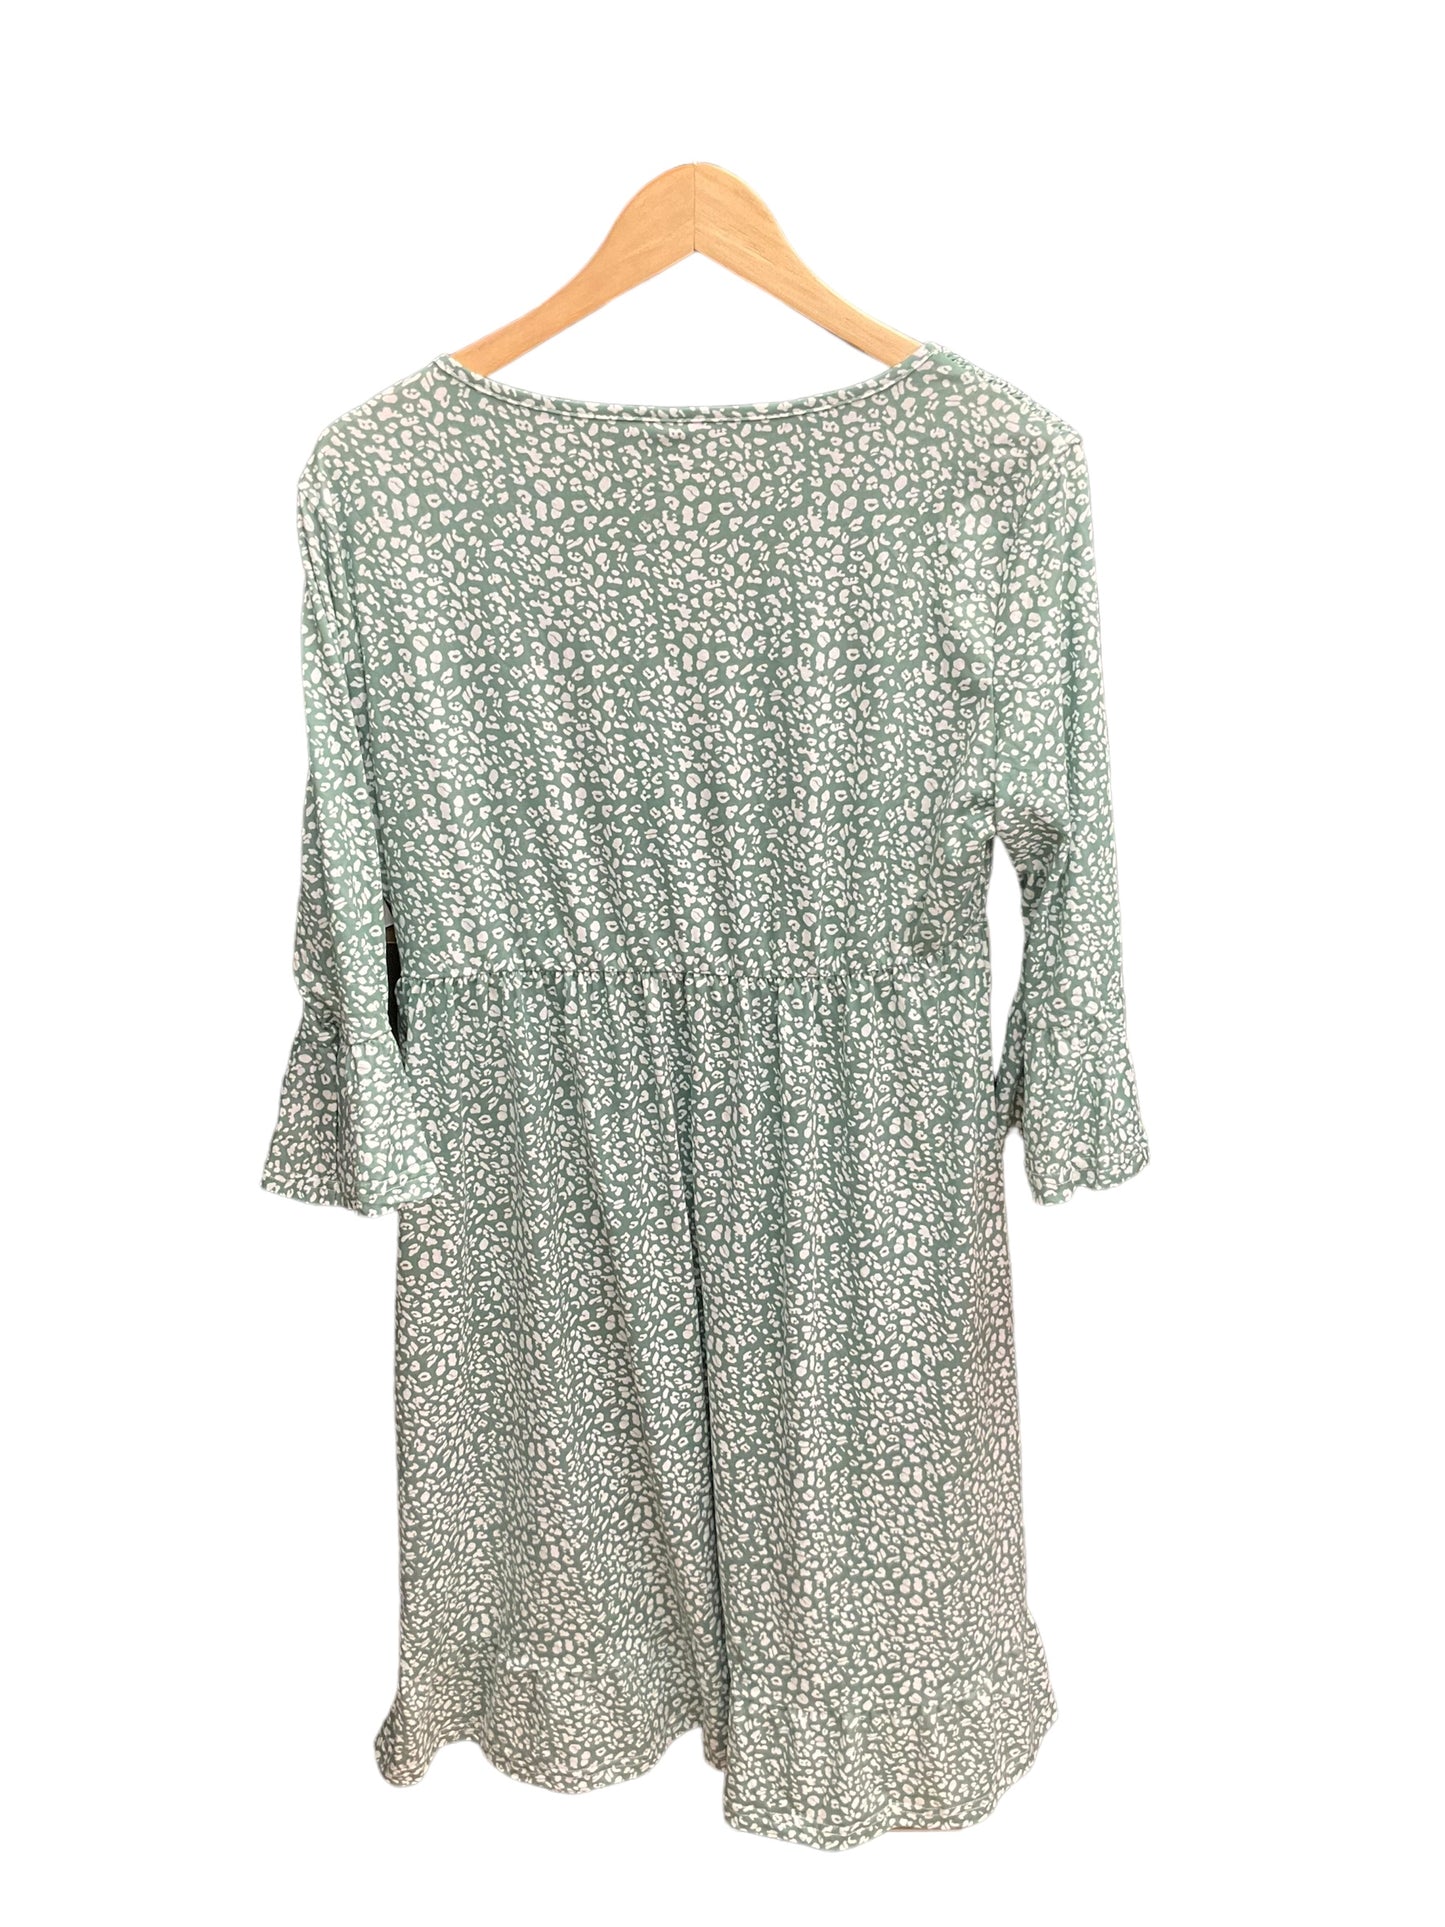 Green & White Dress Casual Midi Clothes Mentor, Size Xl